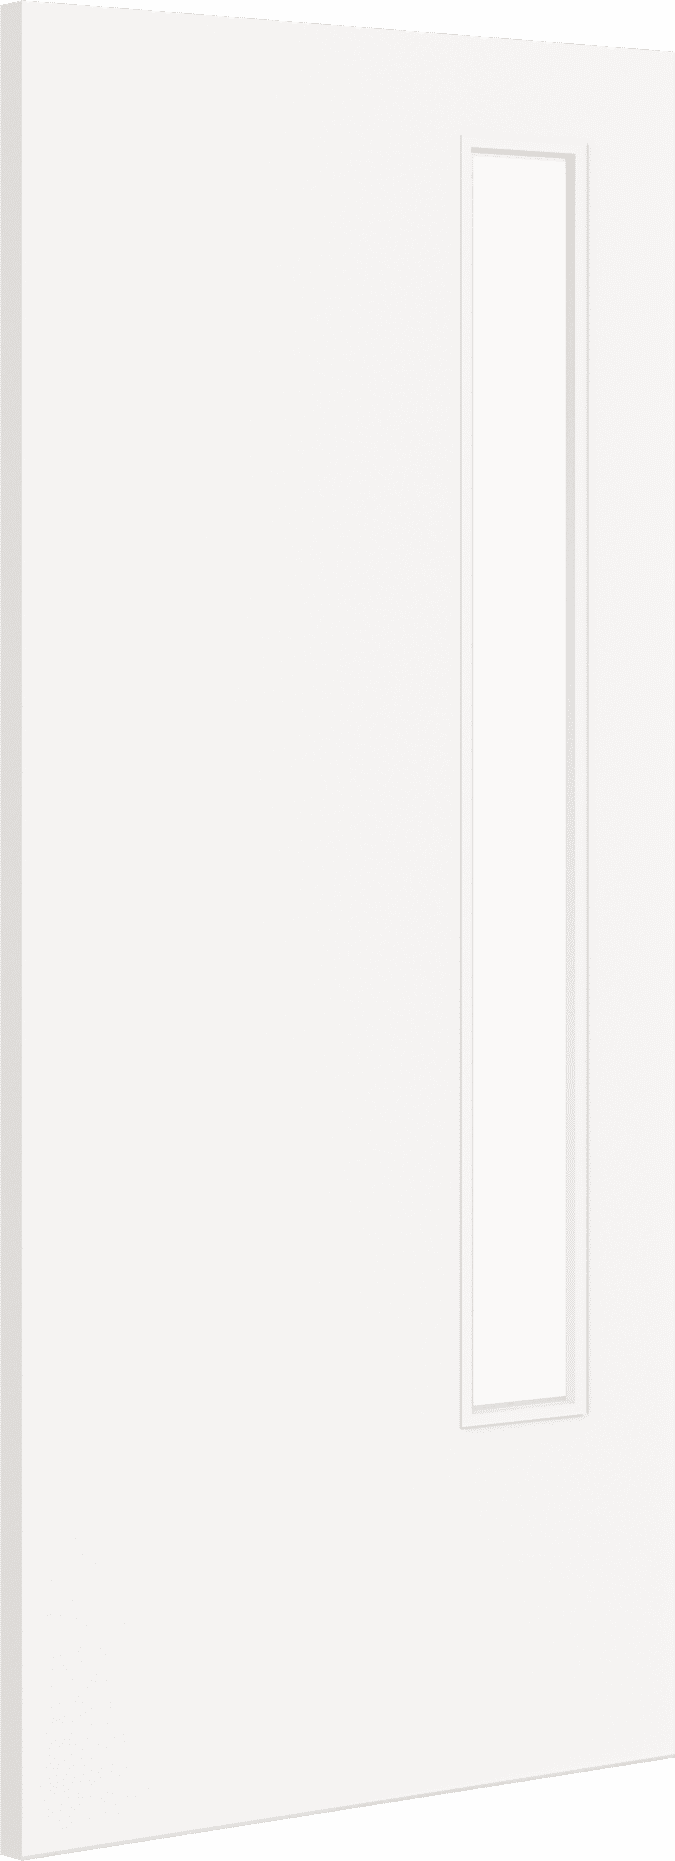 1981mm x 914mm x 44mm (36") Architectural Paint Grade White 13 Clear Glazed Fire Door Blank